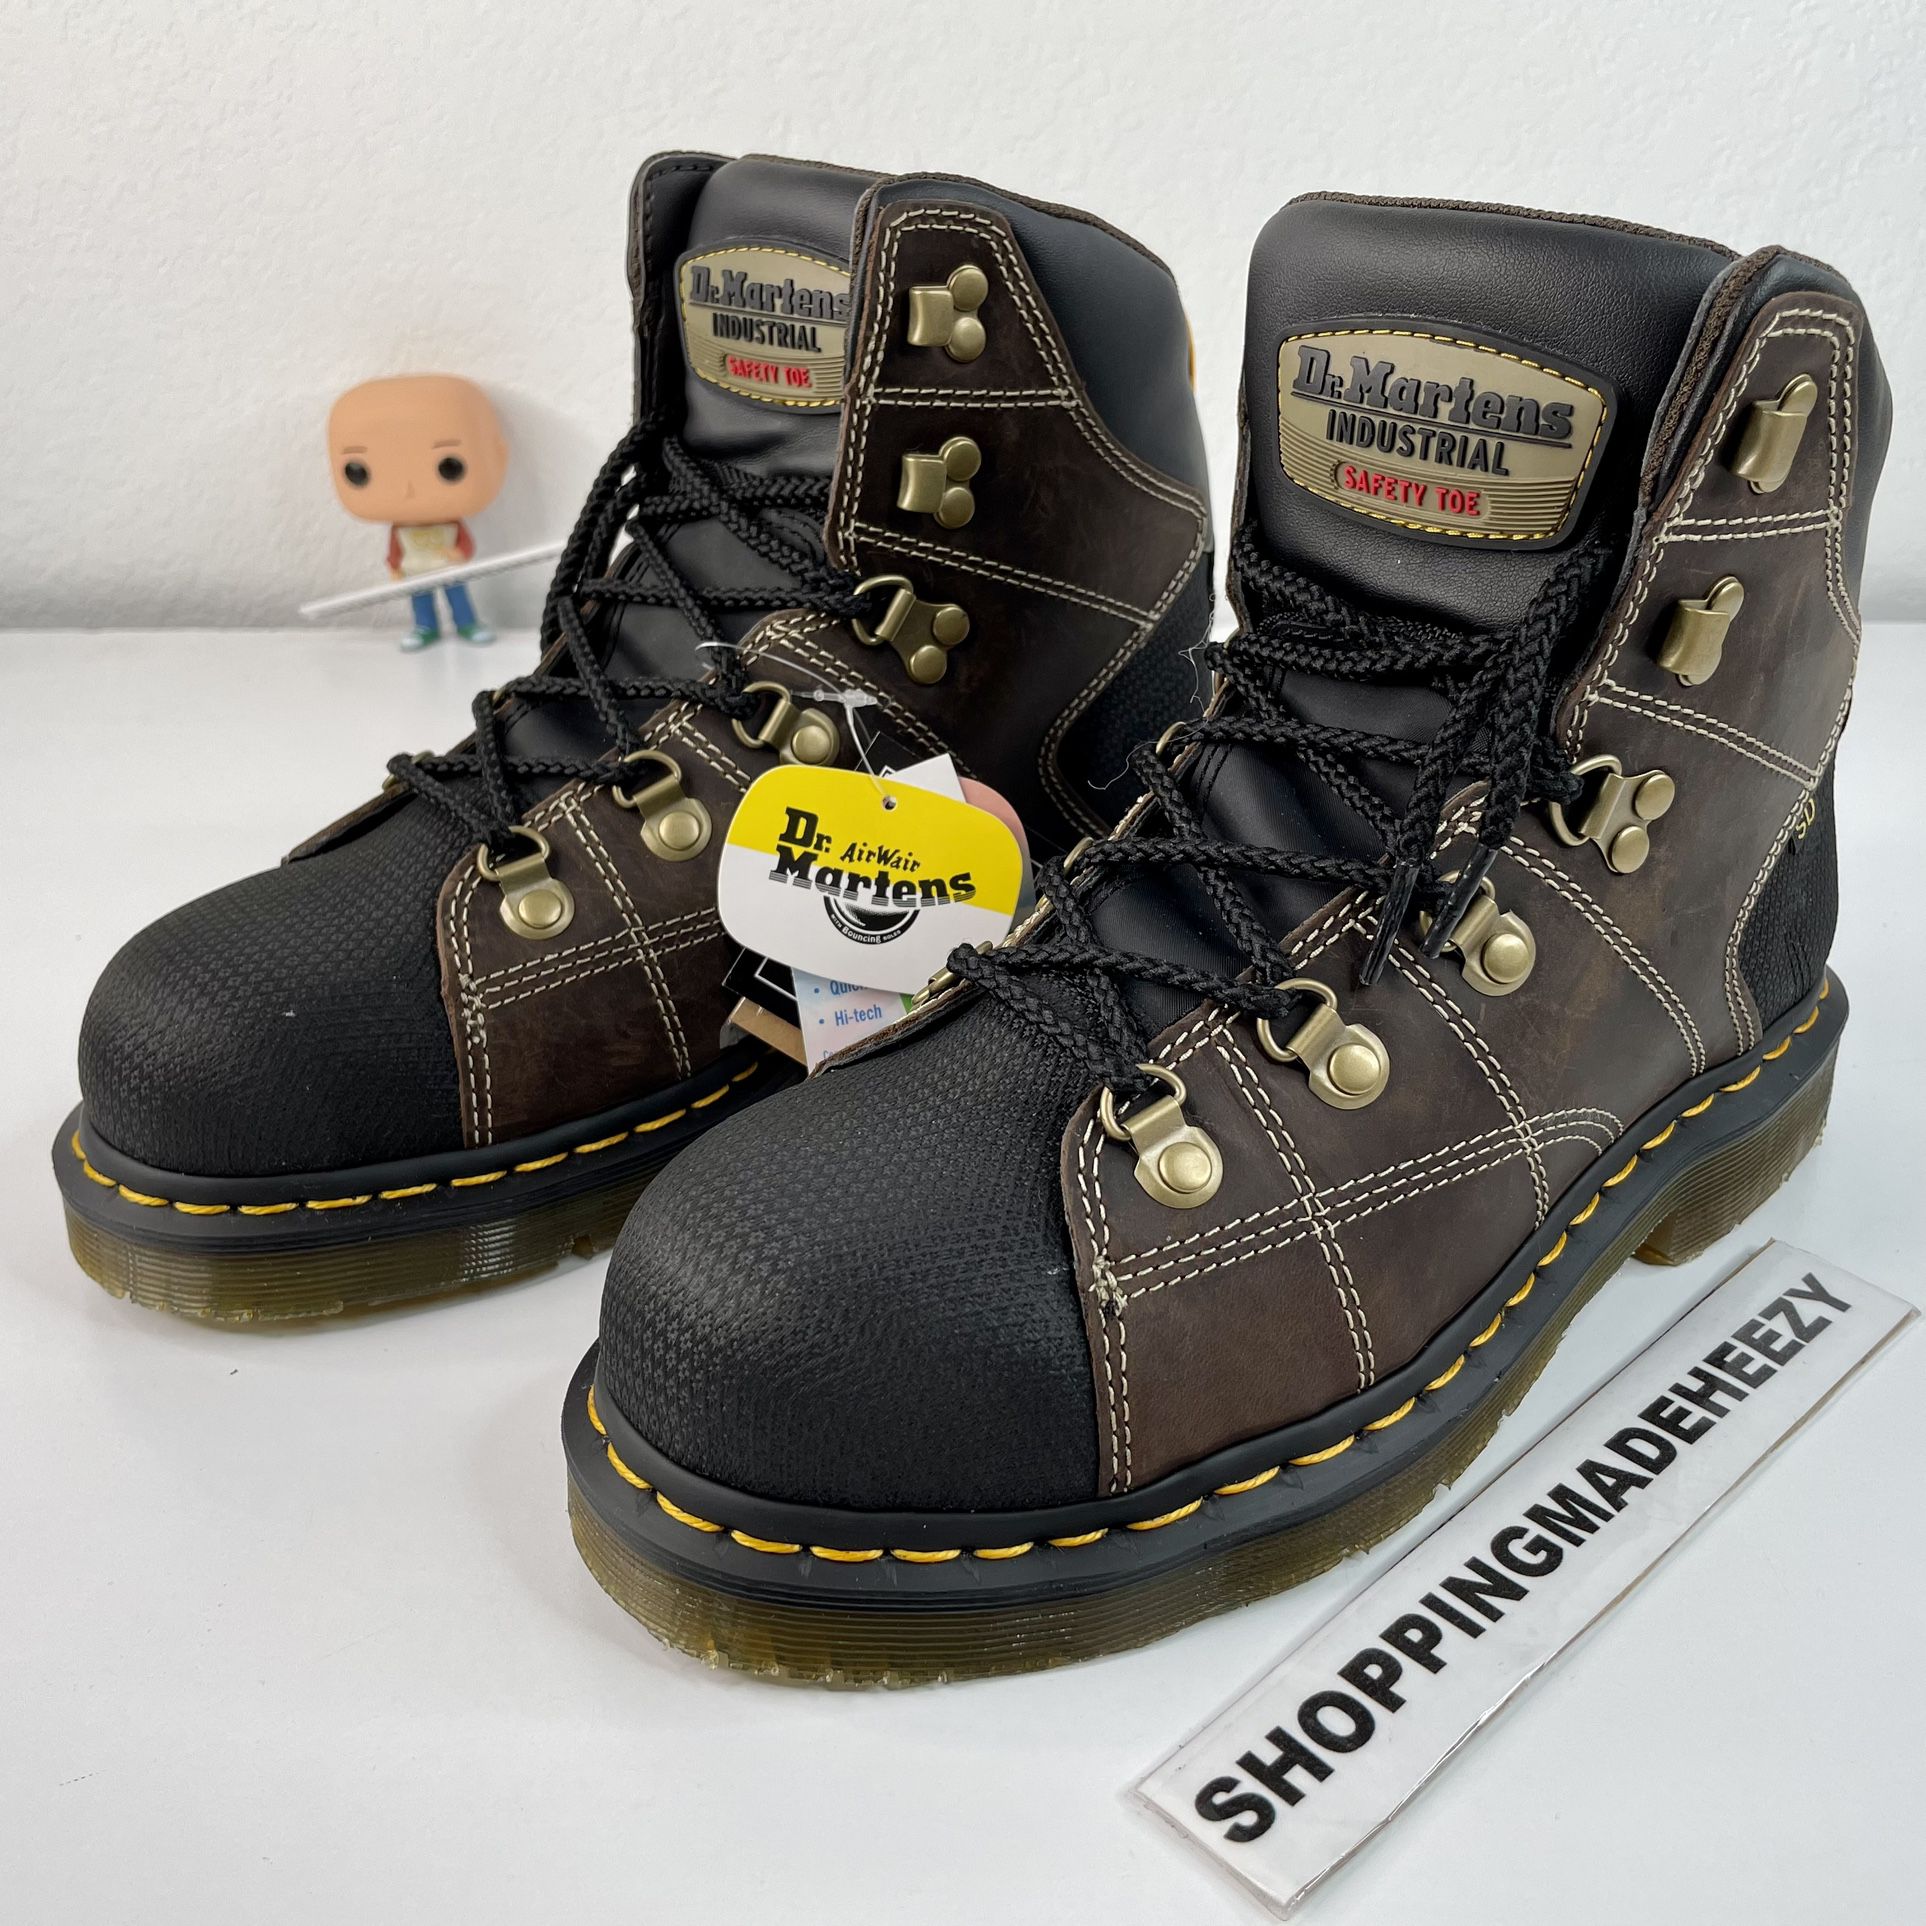 [US 8] Dr. Martens Men's Industrial Rawston SD Safety Steel Toe Work Boots Brown